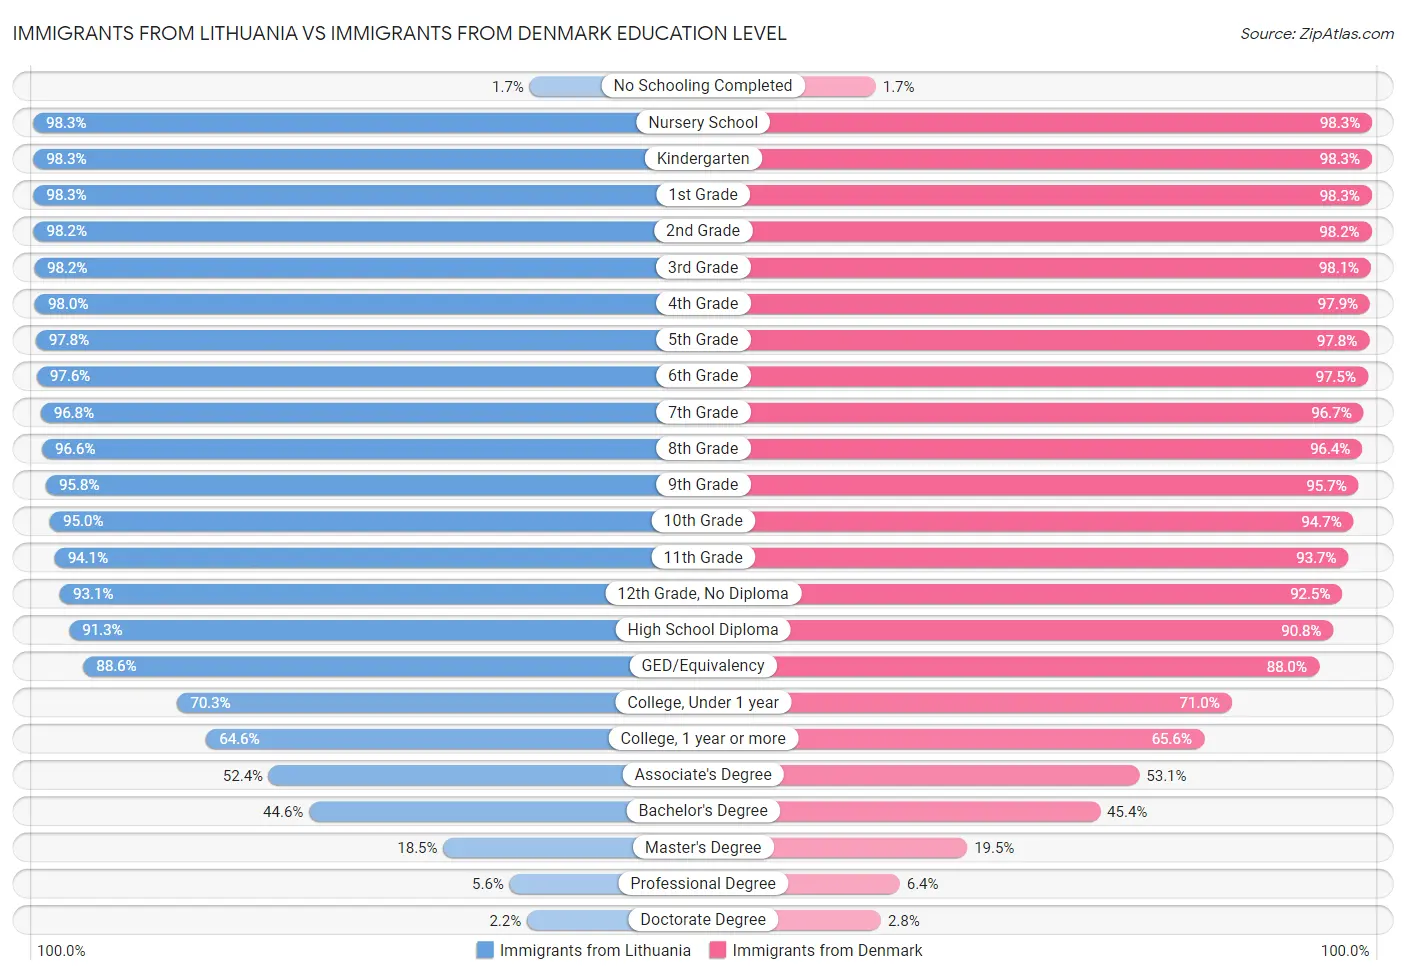 Immigrants from Lithuania vs Immigrants from Denmark Education Level